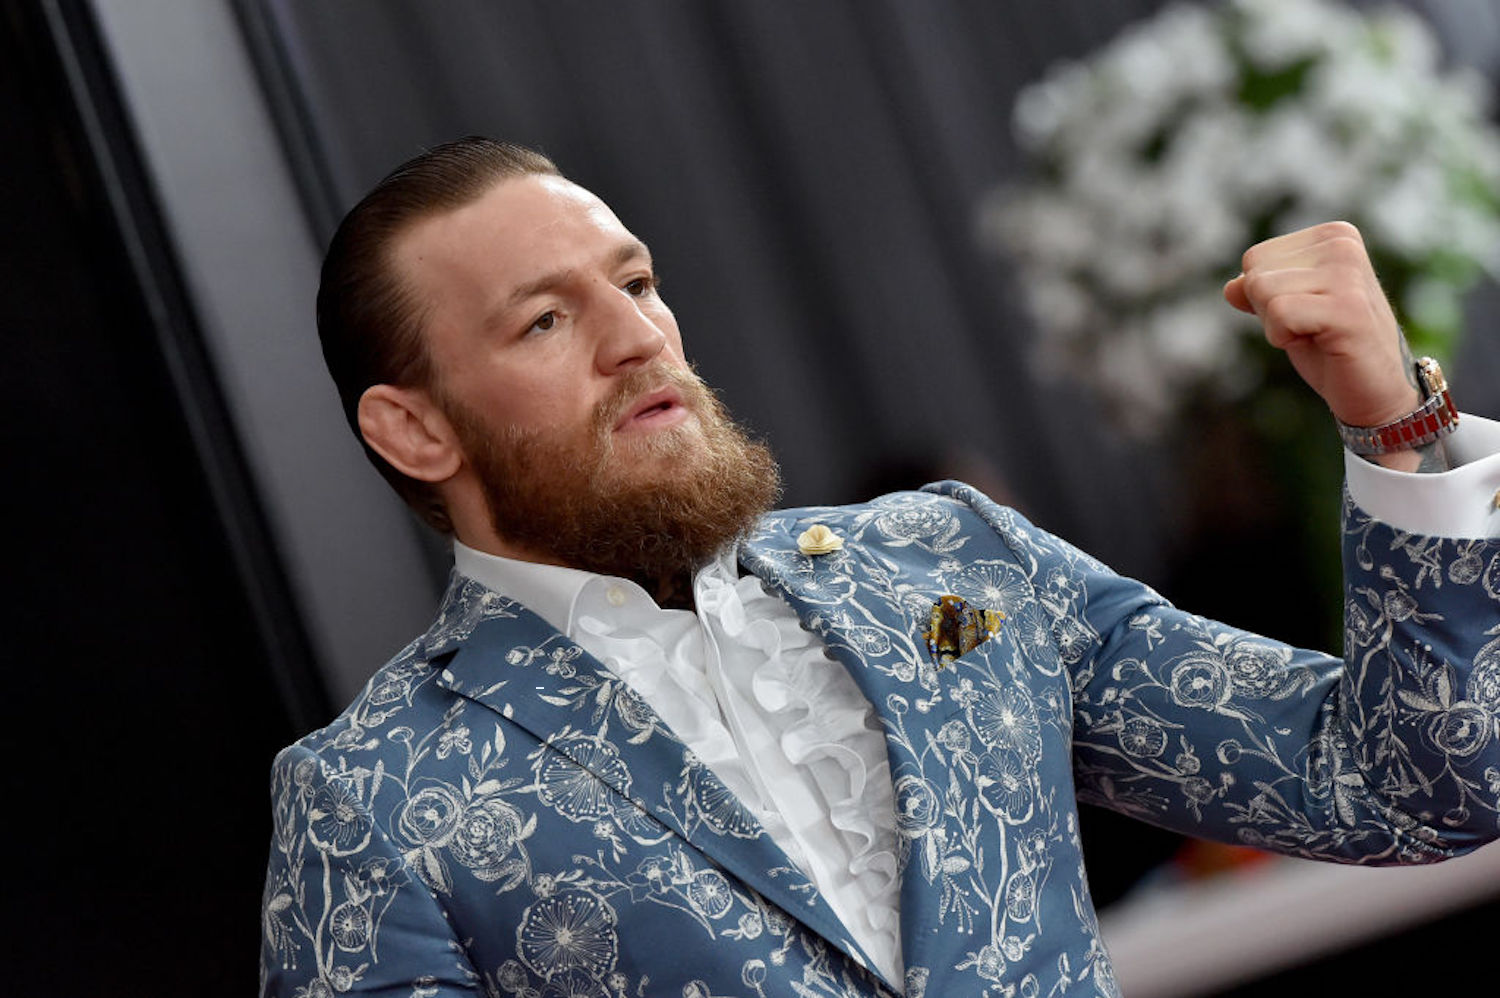 Conor McGregor already has his future plans mapped out after UFC 257, and it sounds like it includes a rubber match against Nate Diaz.